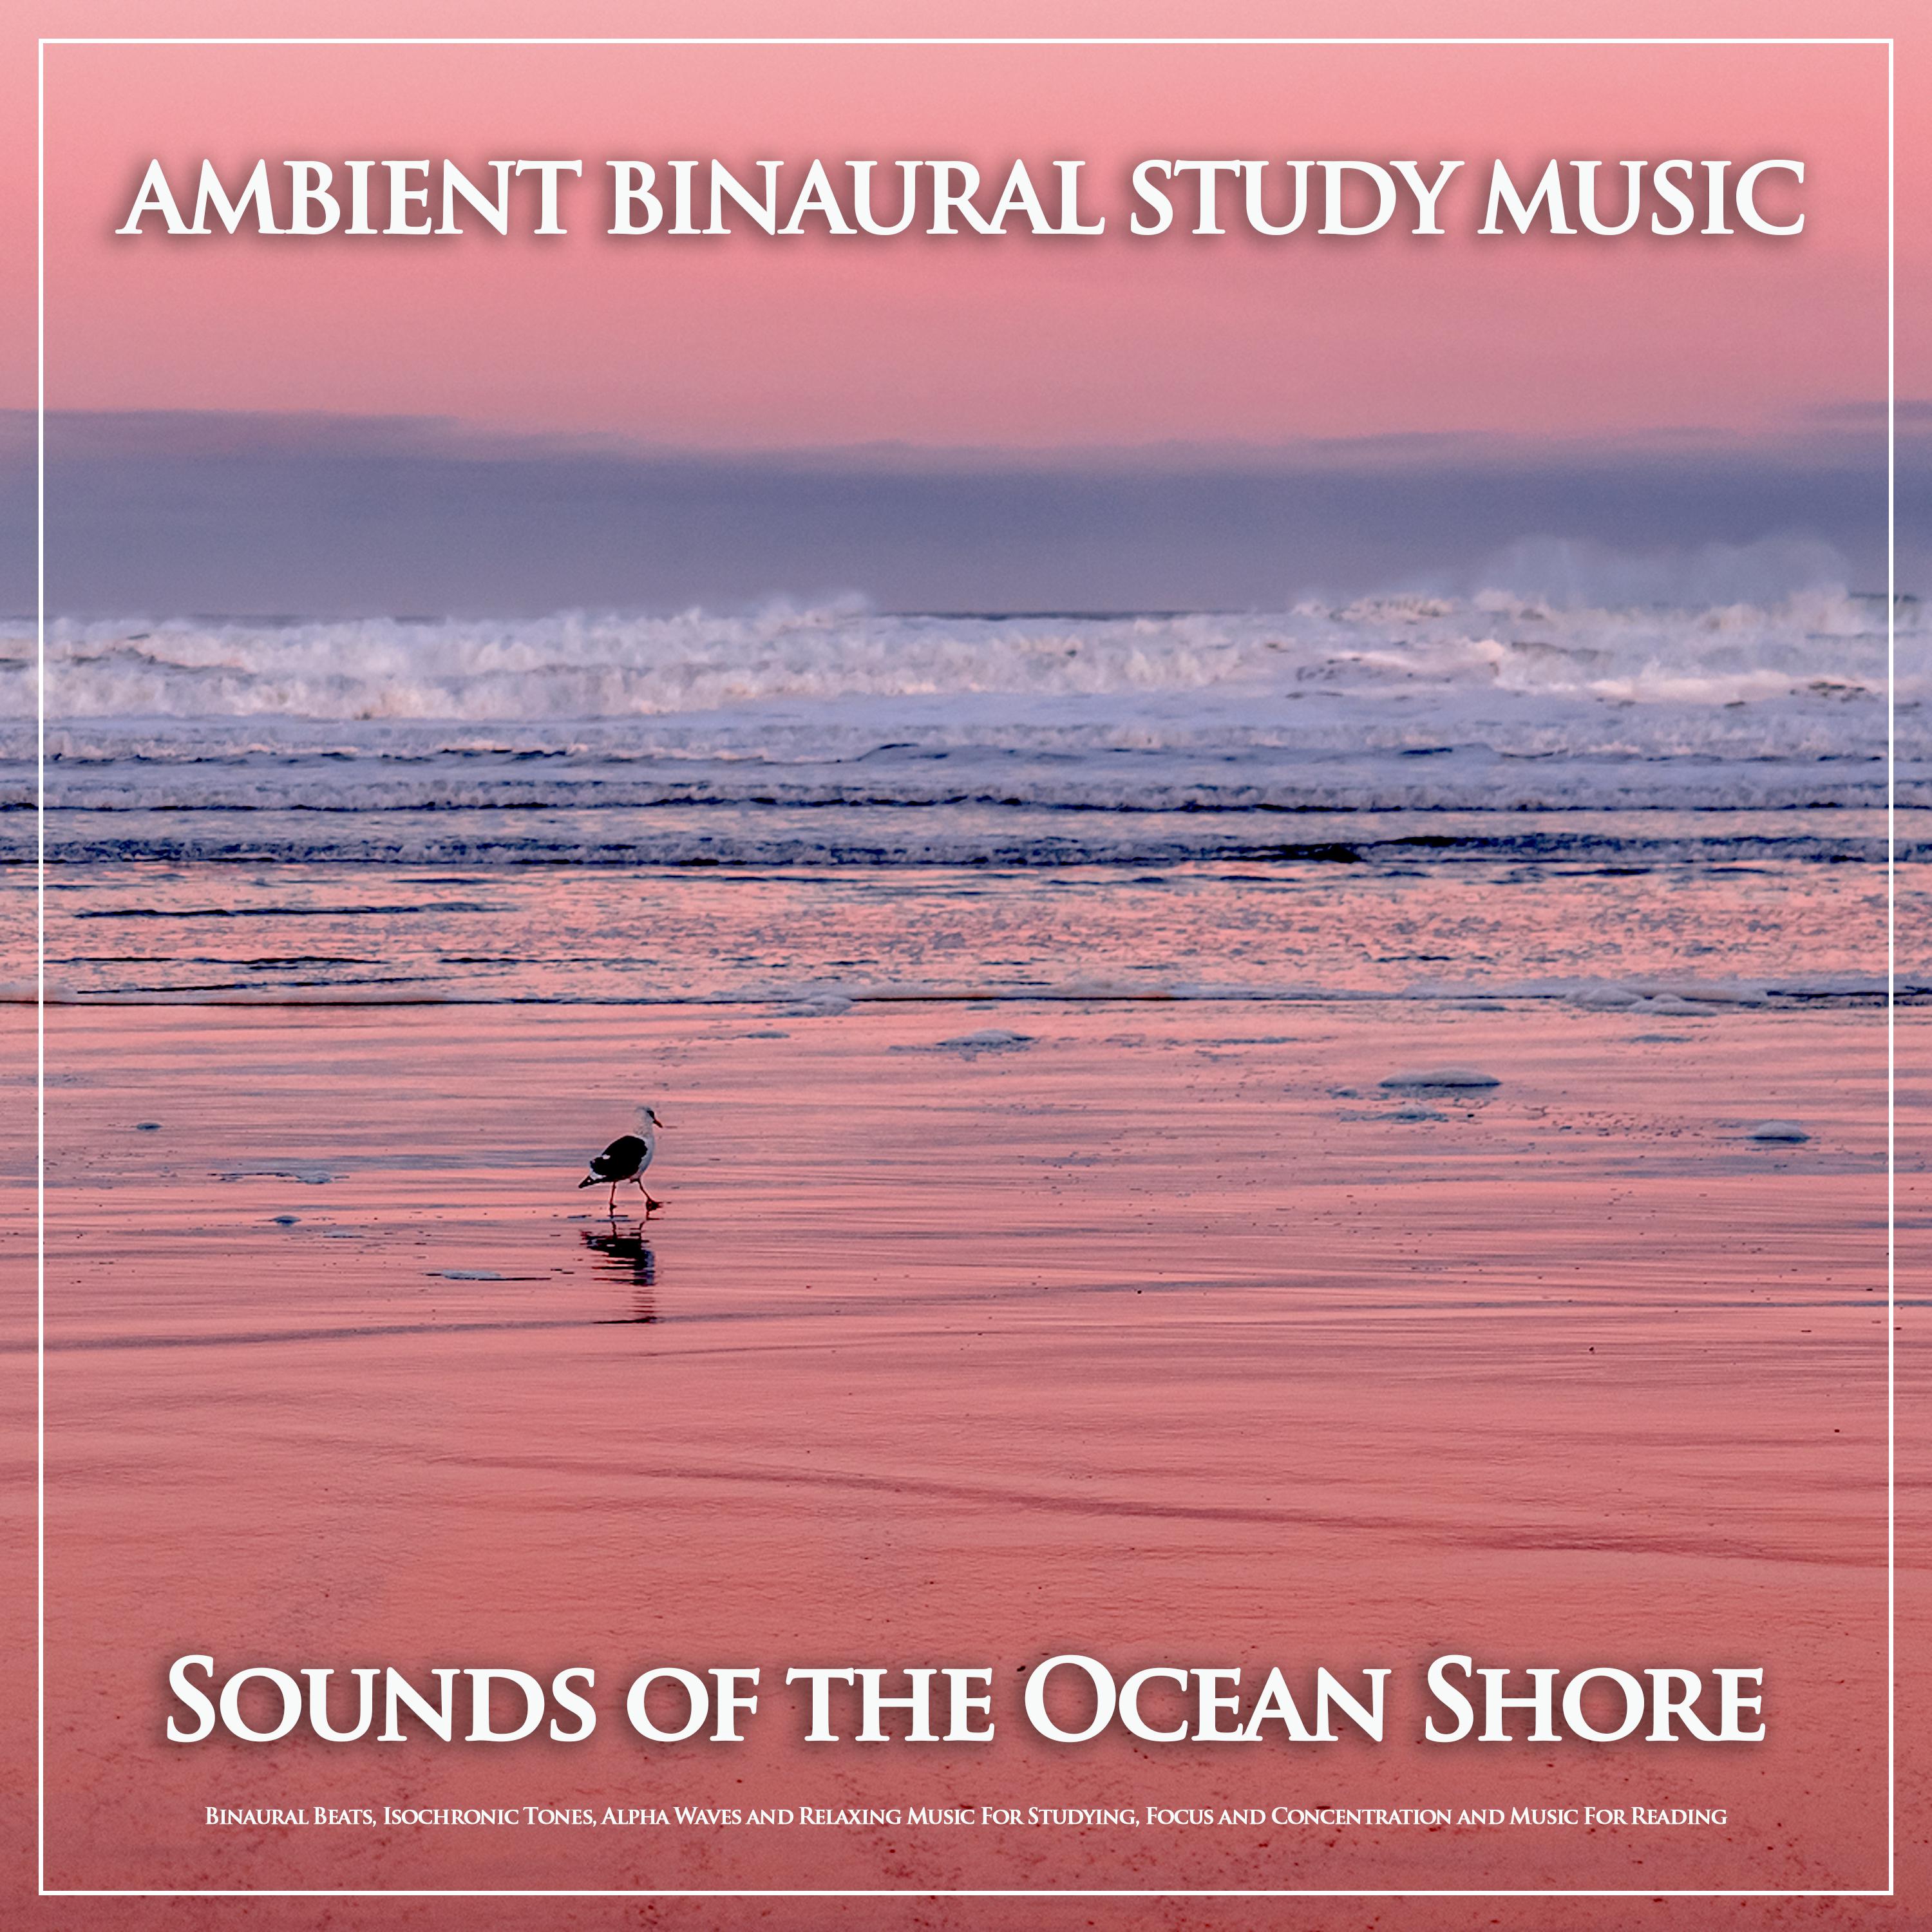 Ambient Studying Music and Isochronic Tones